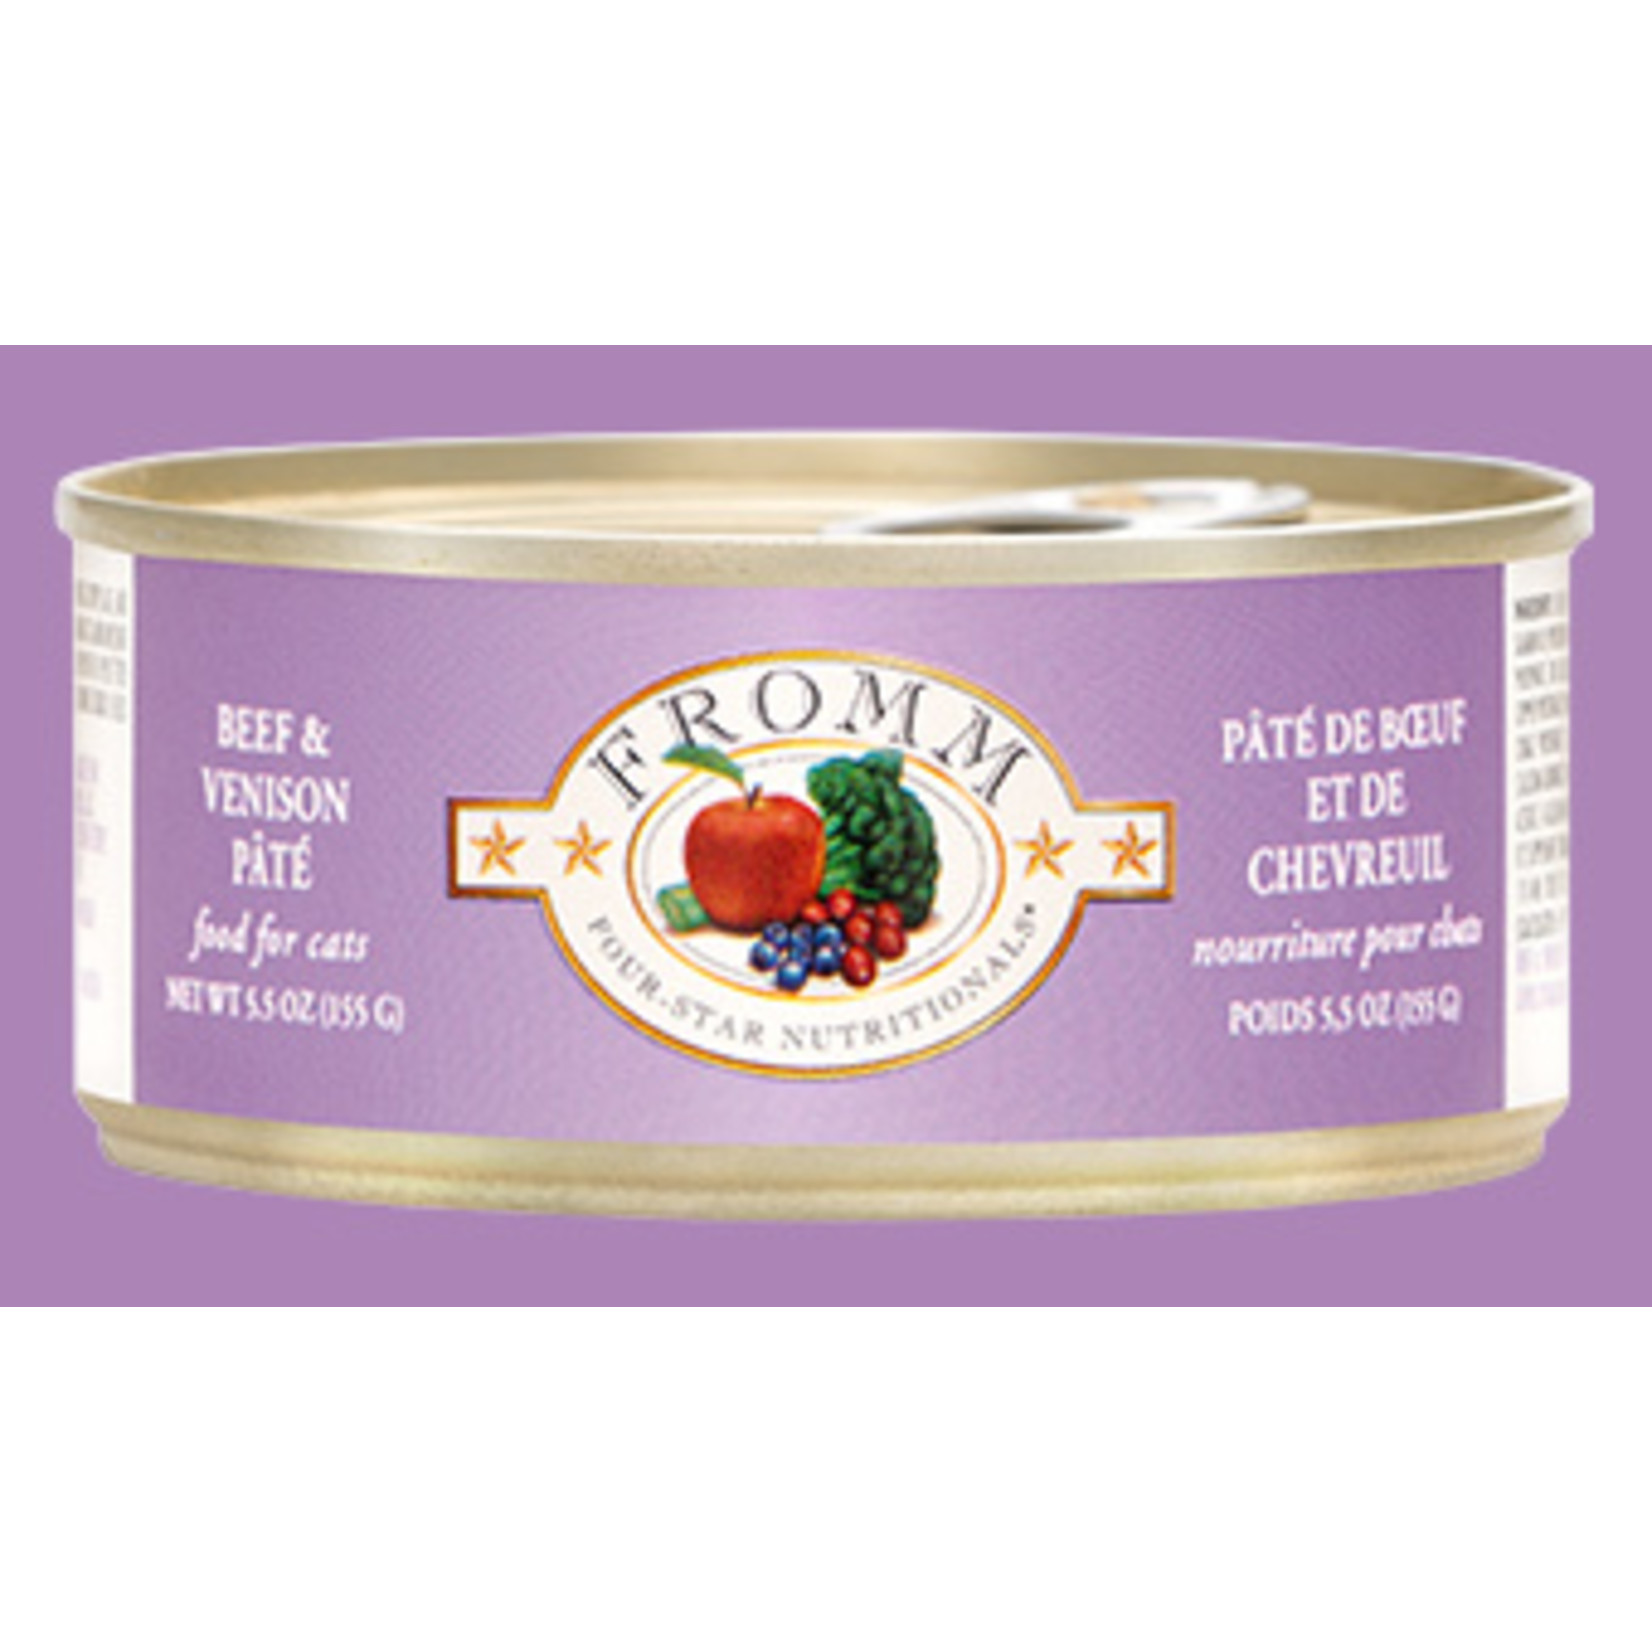 Fromm Fromm Wet Cat Food Four Star Nutritionals Beef & Venison Pate 5.5oz Can Grain Free